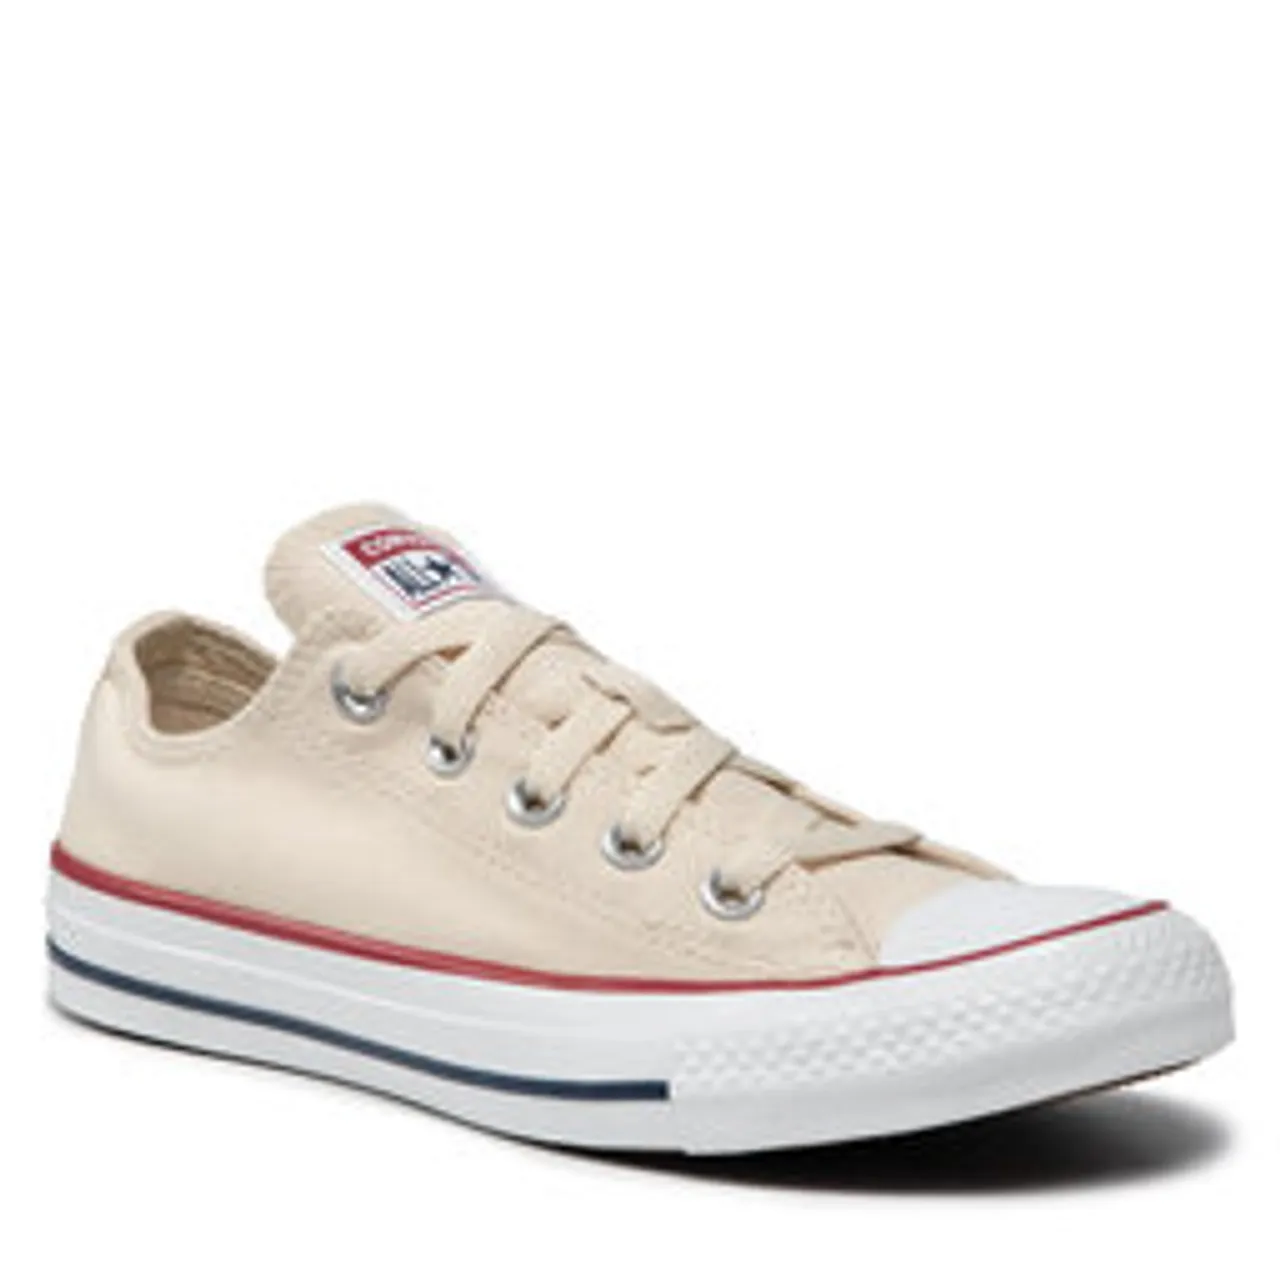 Sneakers aus Stoff Converse Ctas Ox 159485C Natural Ivory